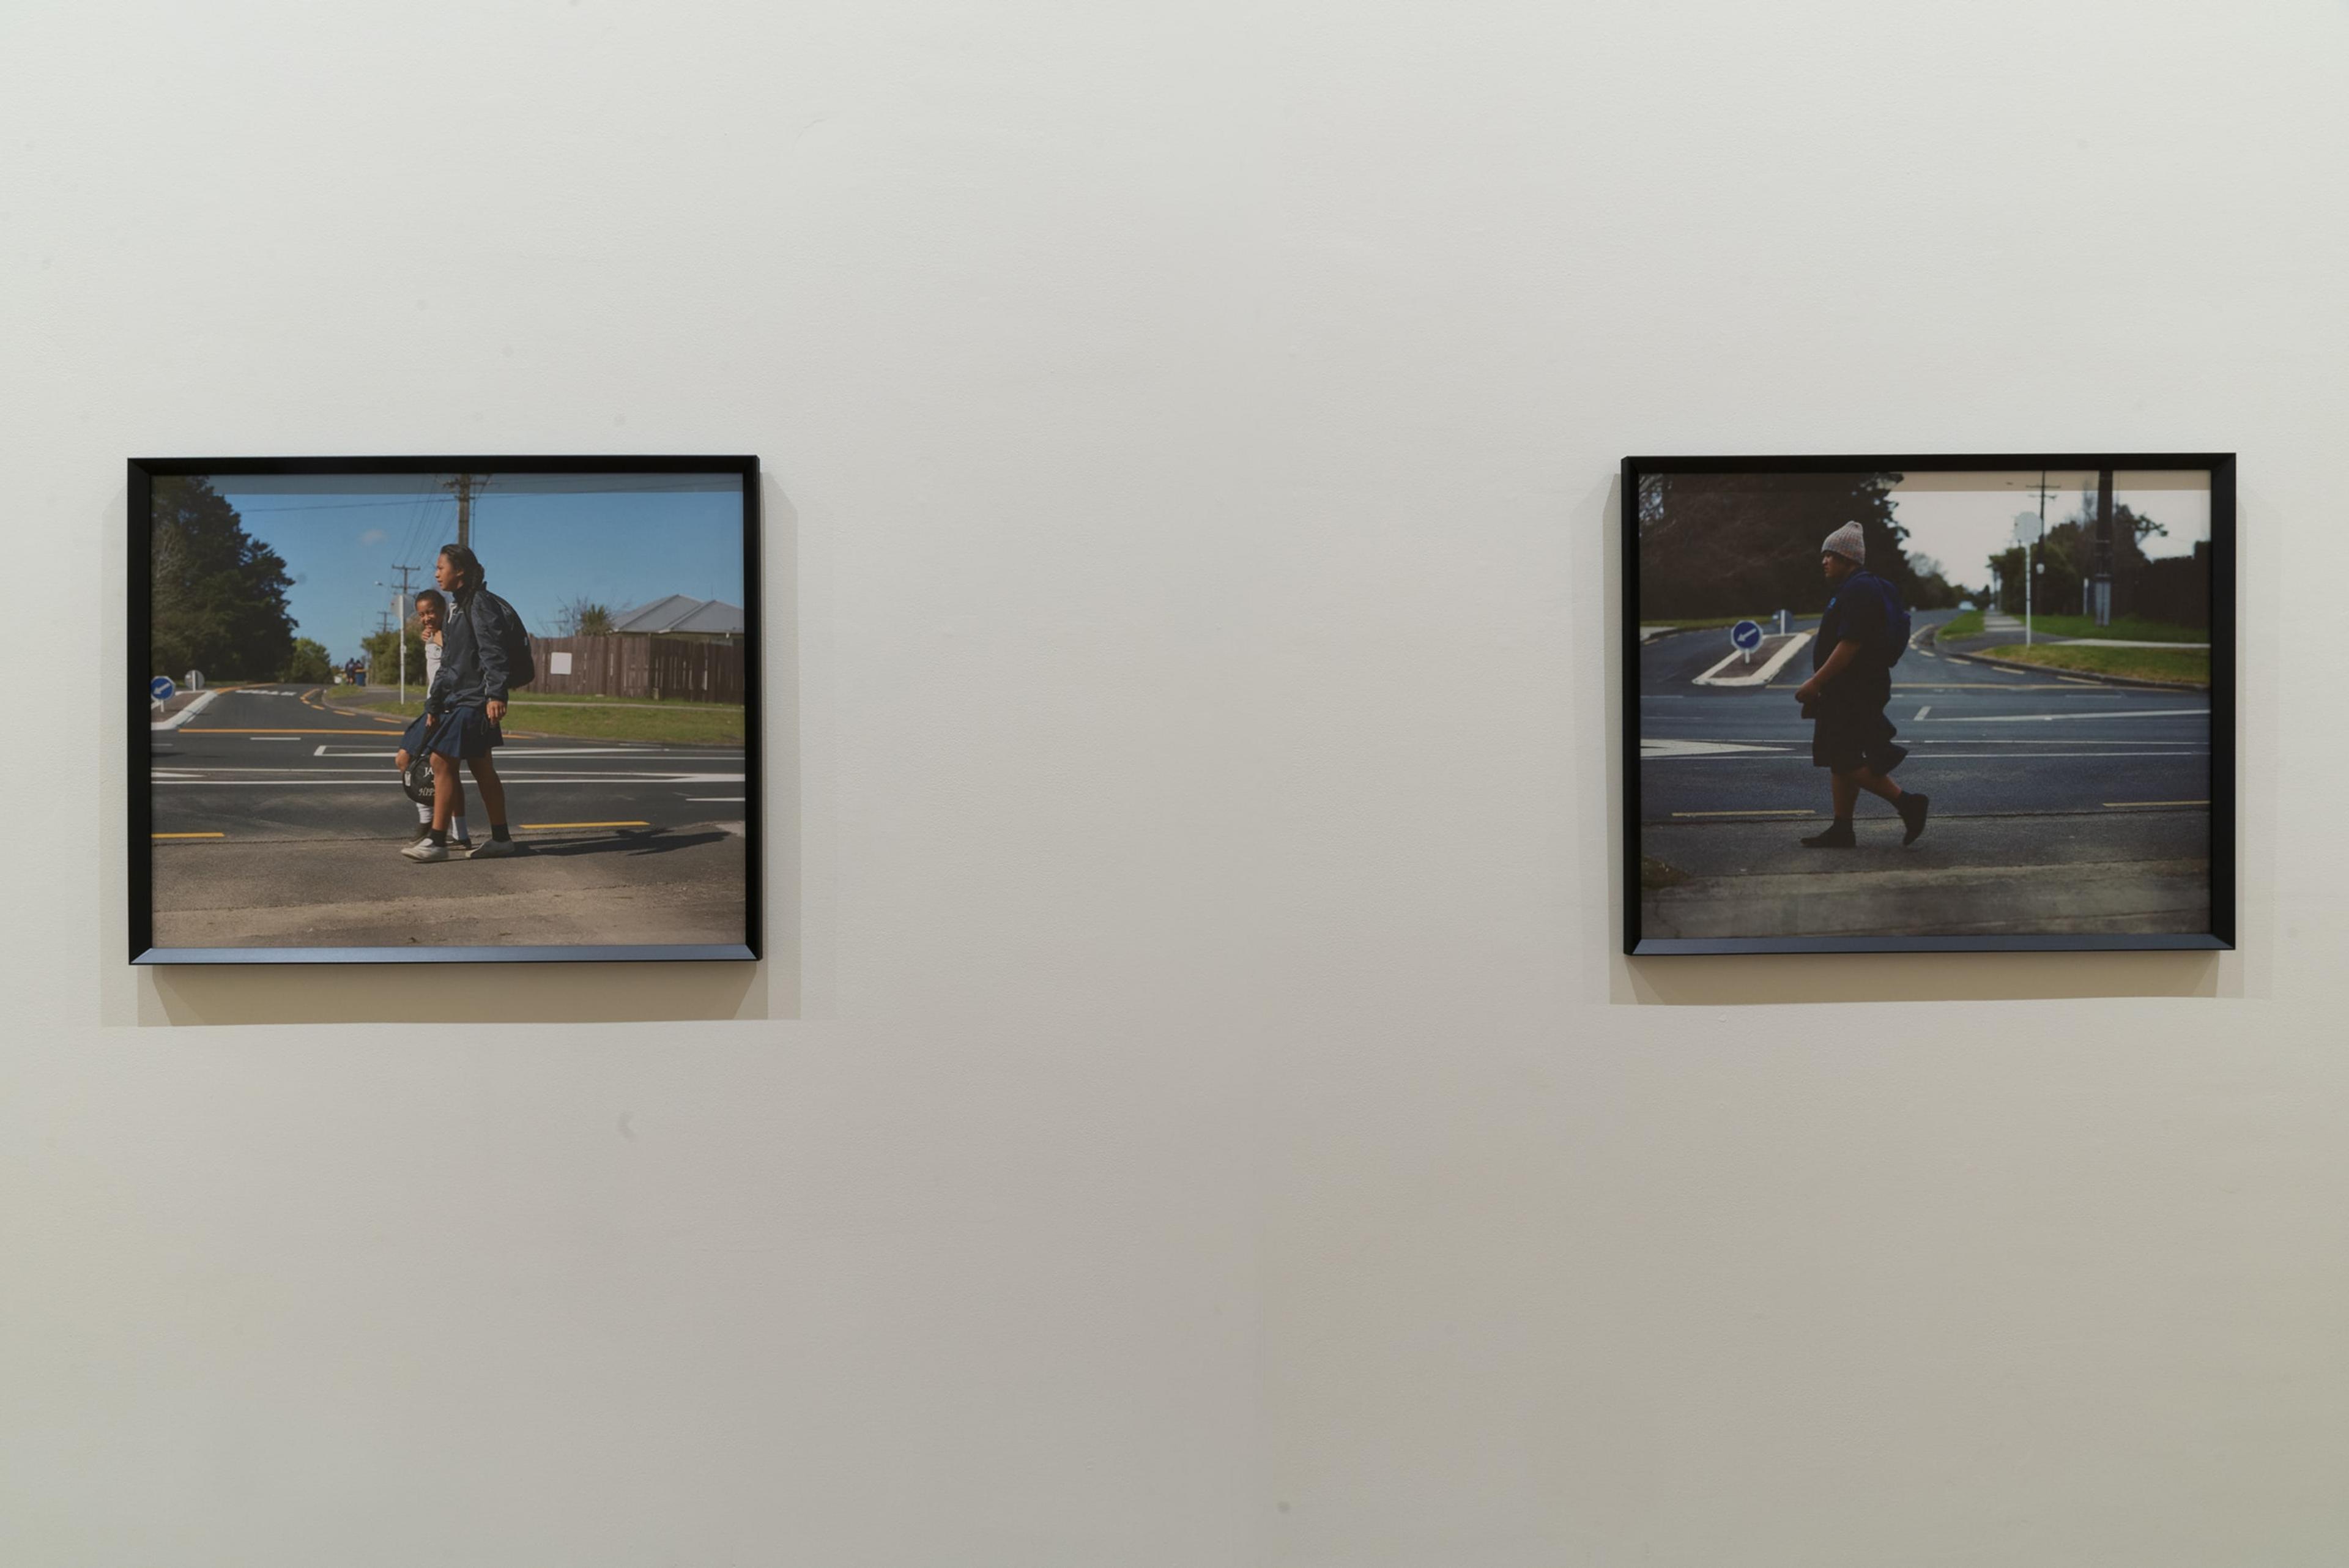 Edith Amituanai, from left: Hips, 2011, pigment inkjet print; Beanie, 2011, pigment inkjet print, Collection Auckland Art Gallery Toi o Tāmaki. Installation view, Edith Amituanai: Double Take, curated by Ane Tonga, Adam Art Gallery Te Pātaka Toi, Victoria University of Wellington, 11 May – 14 July 2019.